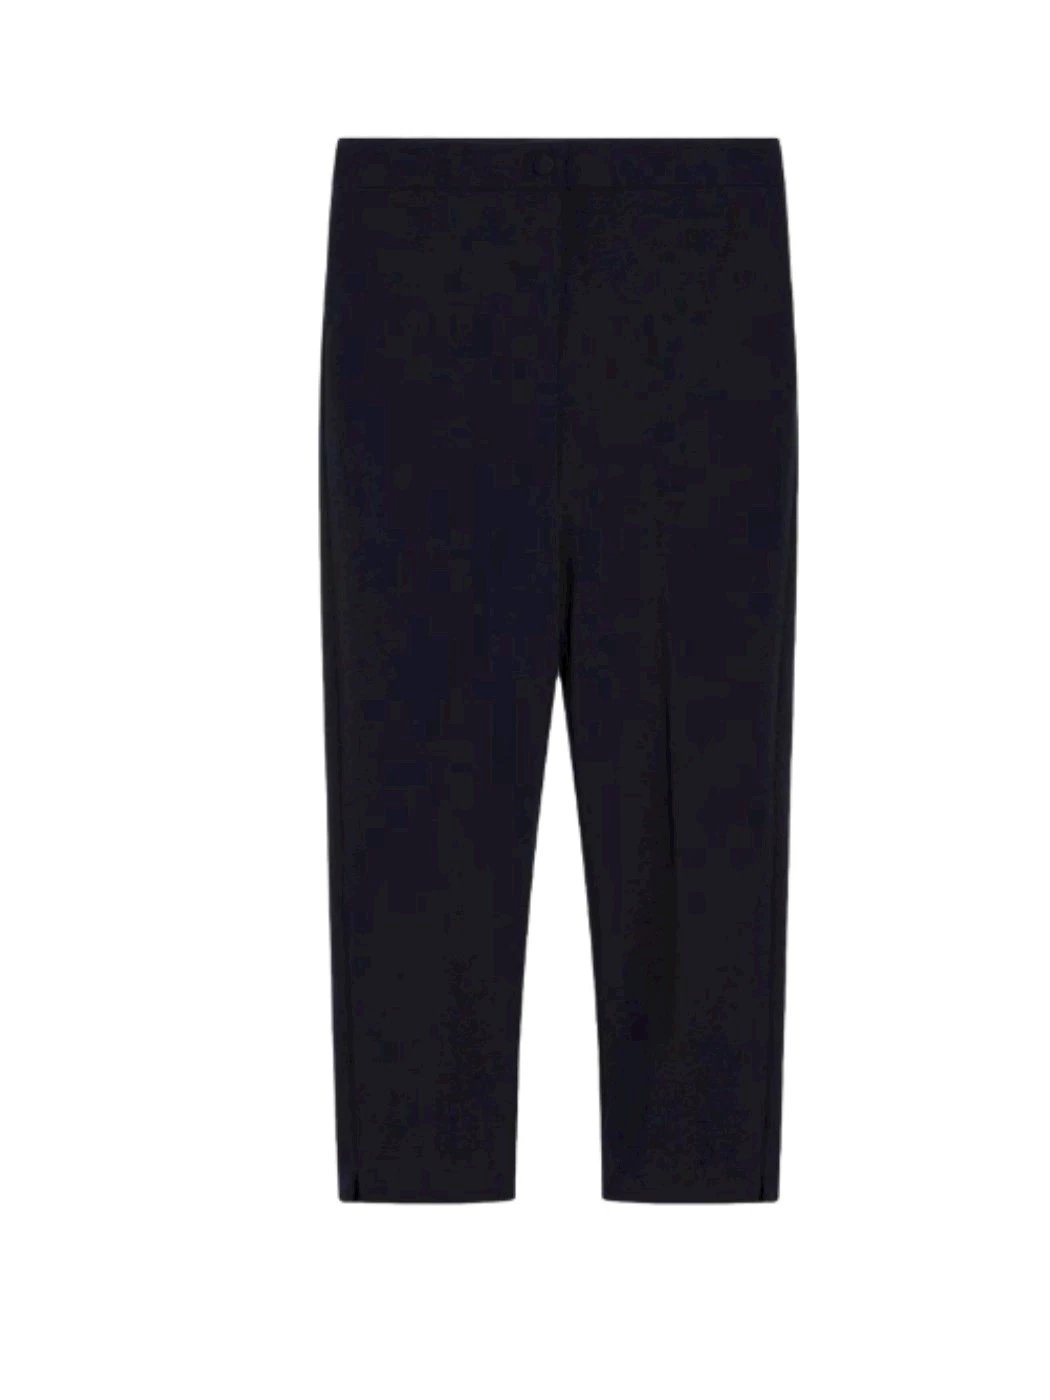 IBlues jersey trousers